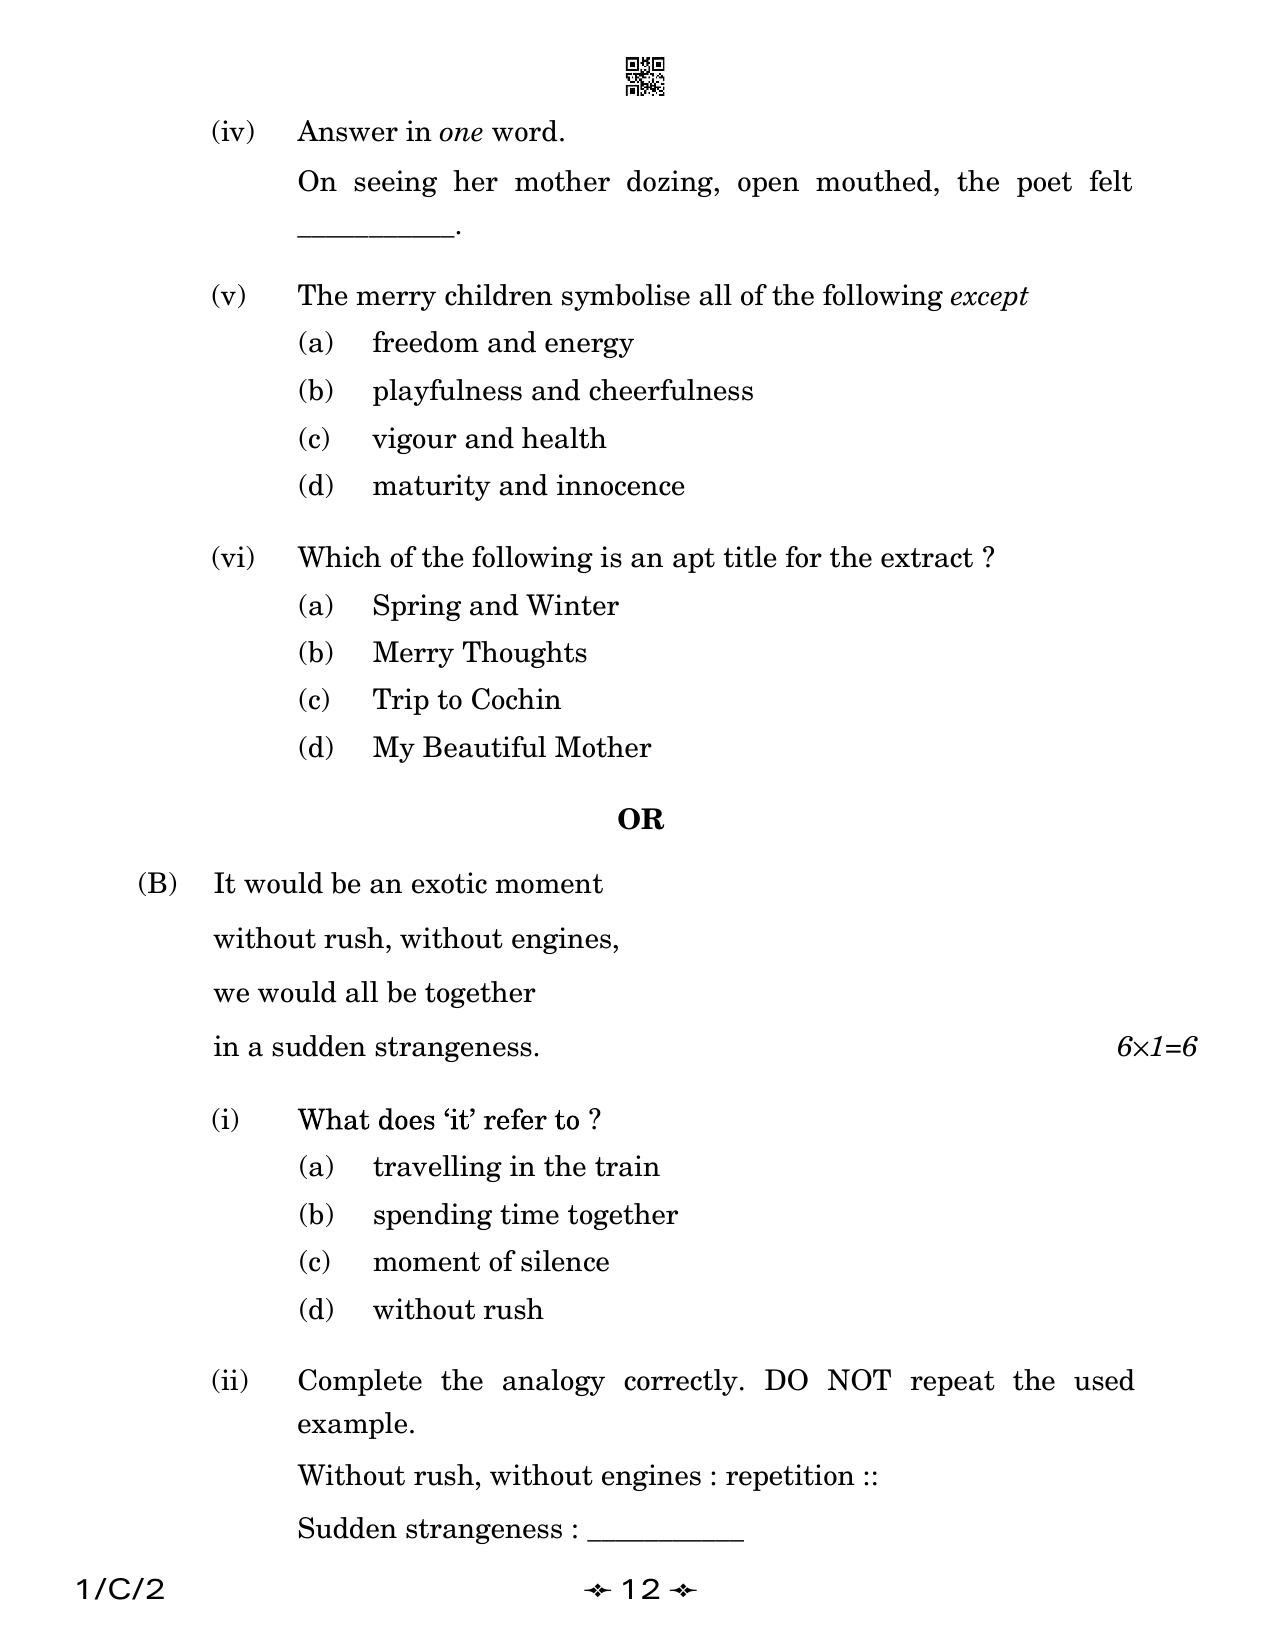 CBSE Class 12 1-2 English Core 2023 (Compartment) Question Paper - Page 12